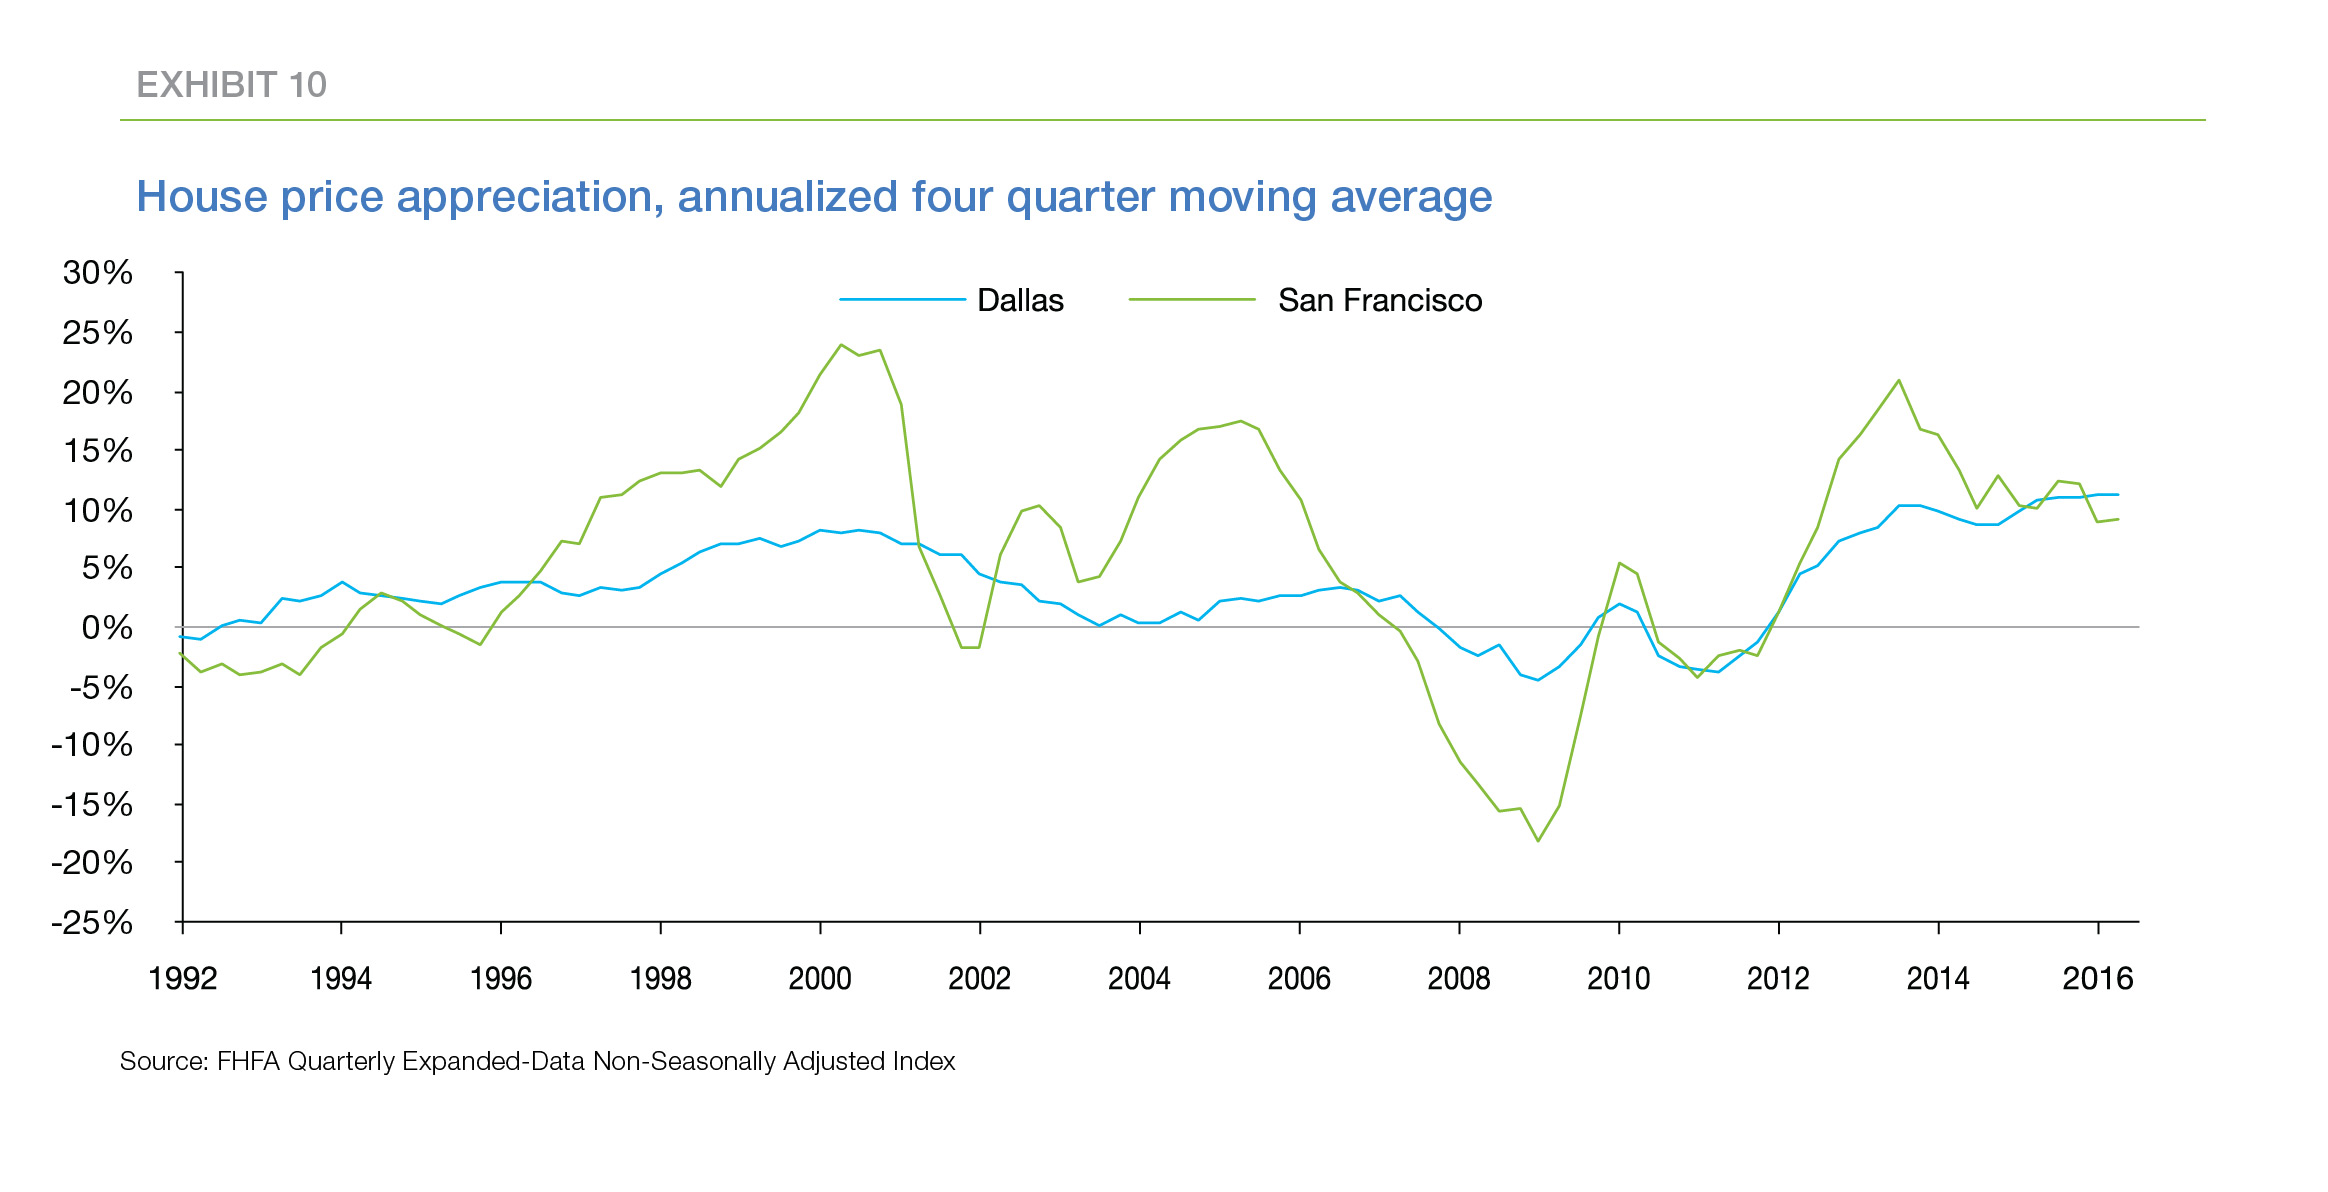 Line graph showing house price appreciation, annualized fourth quarter moving average between Dallas and San Francisco from 1992 to 2016